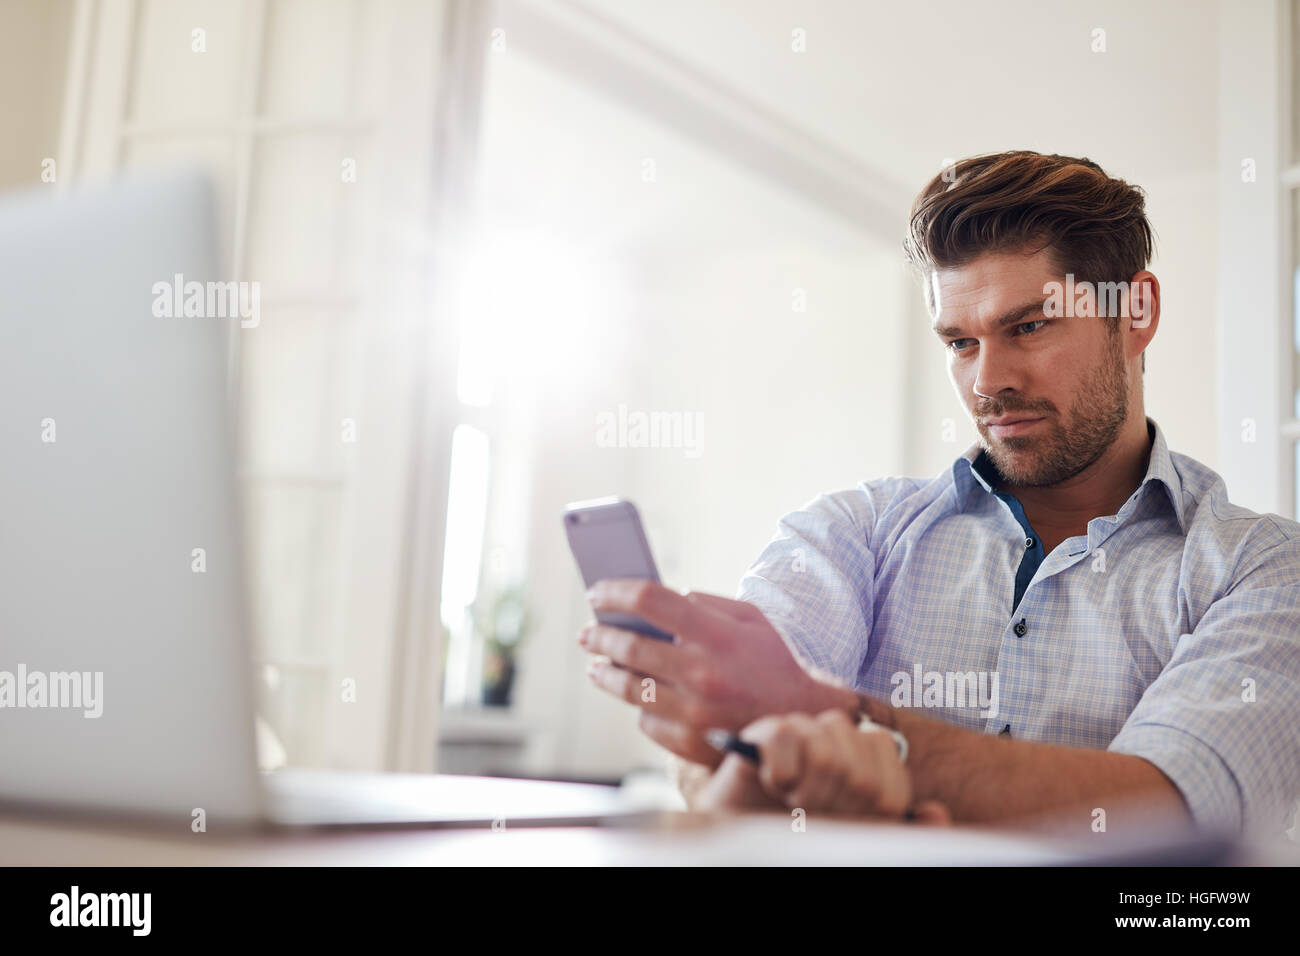 Shot of relaxed young man sitting at desk using mobile phone. Handsome caucasian man reading text message on his smart phone. Stock Photo